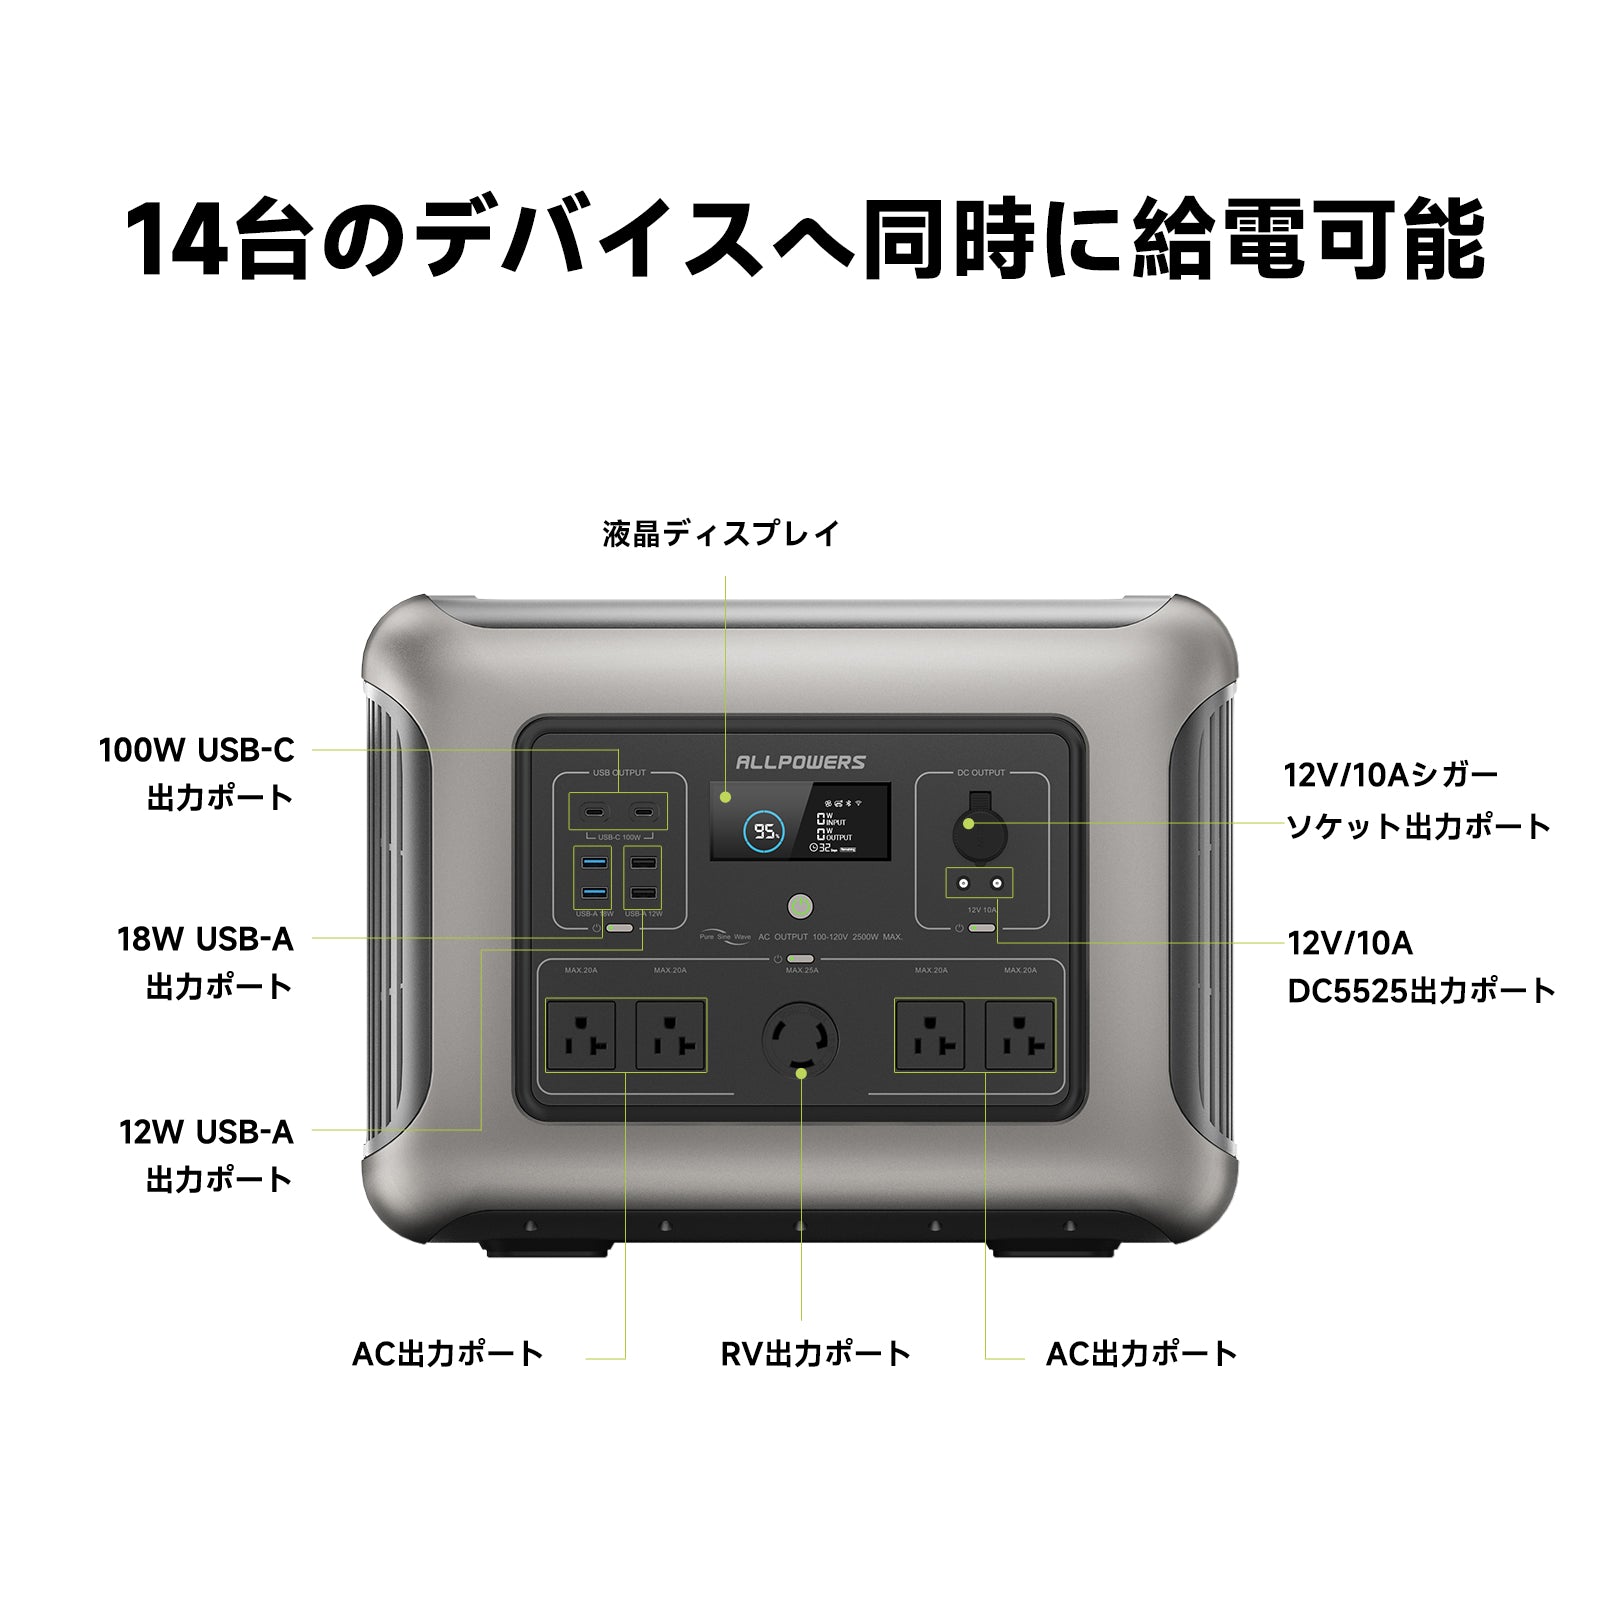 ALLPOWERS R2500 ポータブル電源 2500W/2016Wh大容量